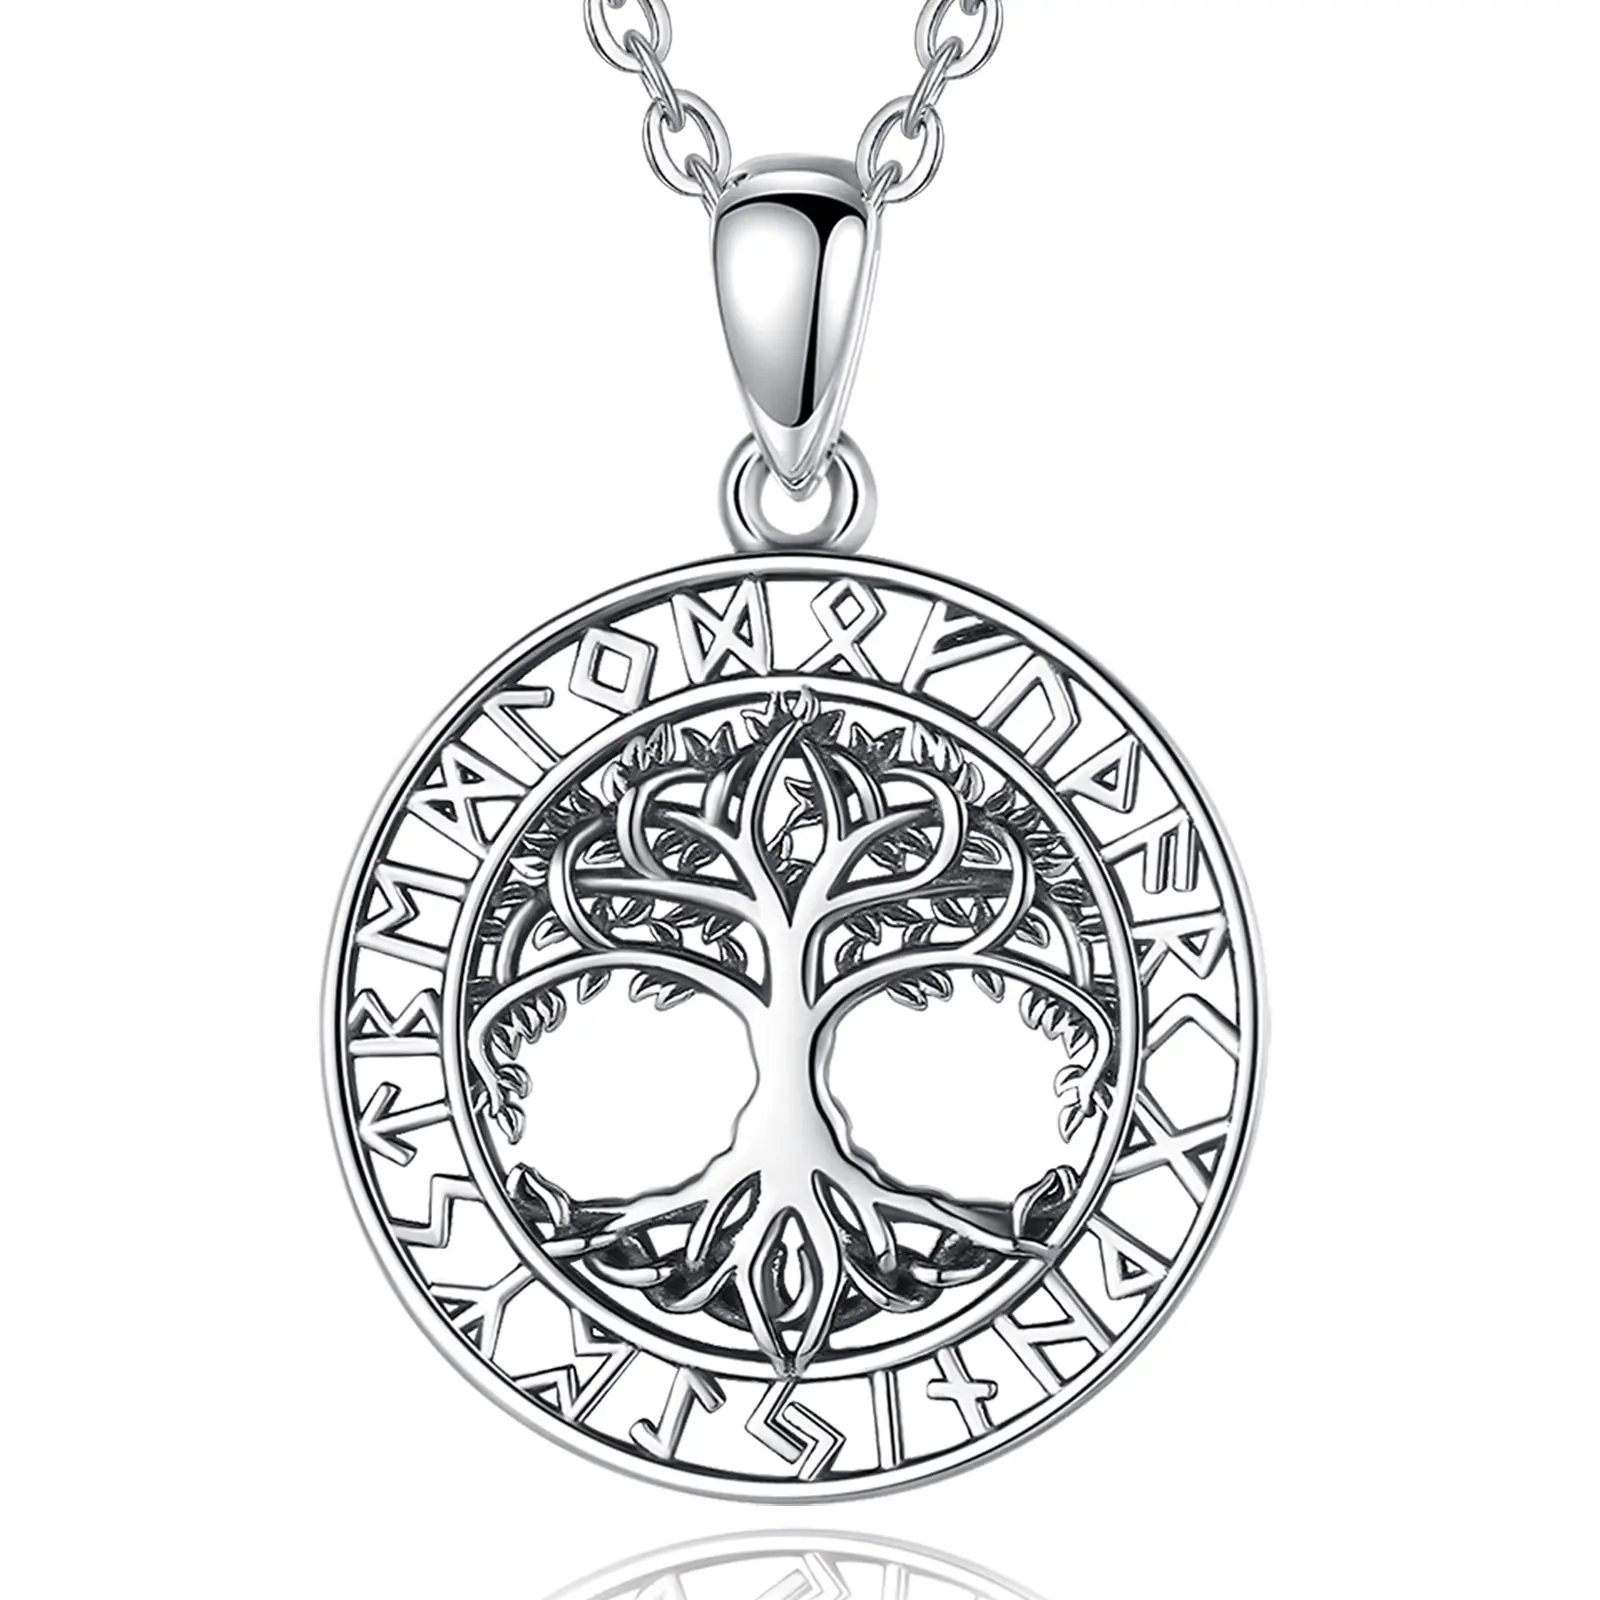 Merryshine 925 Sterling silver jewelry vintage family tree of life amulet vegvisir nordic viking rune pendant necklace